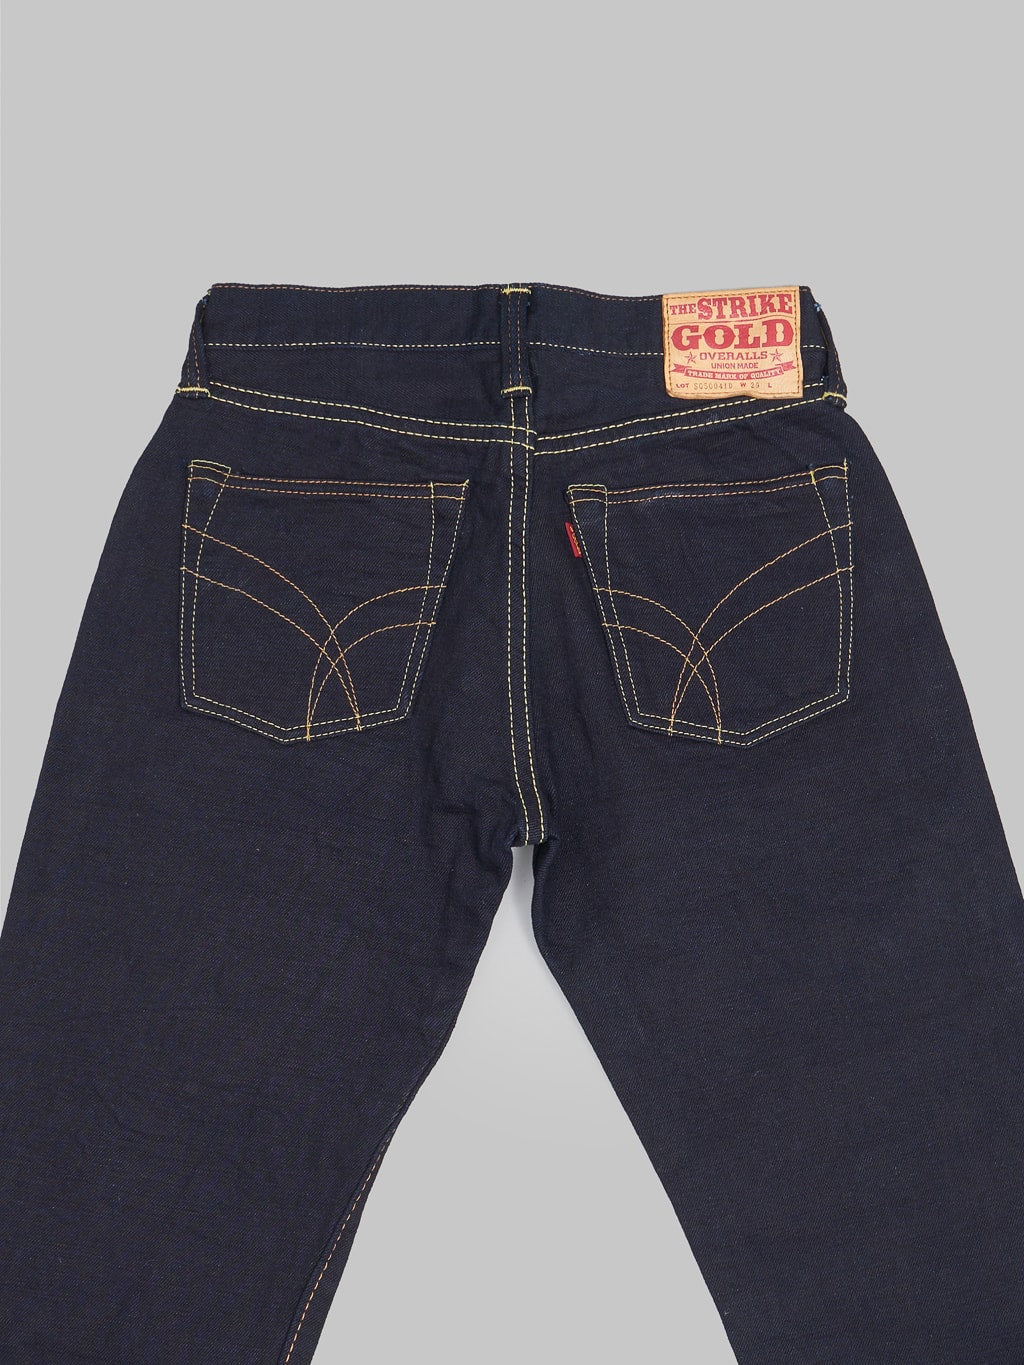 The Strike Gold 5004ID double indigo selvedge jeans back pockets